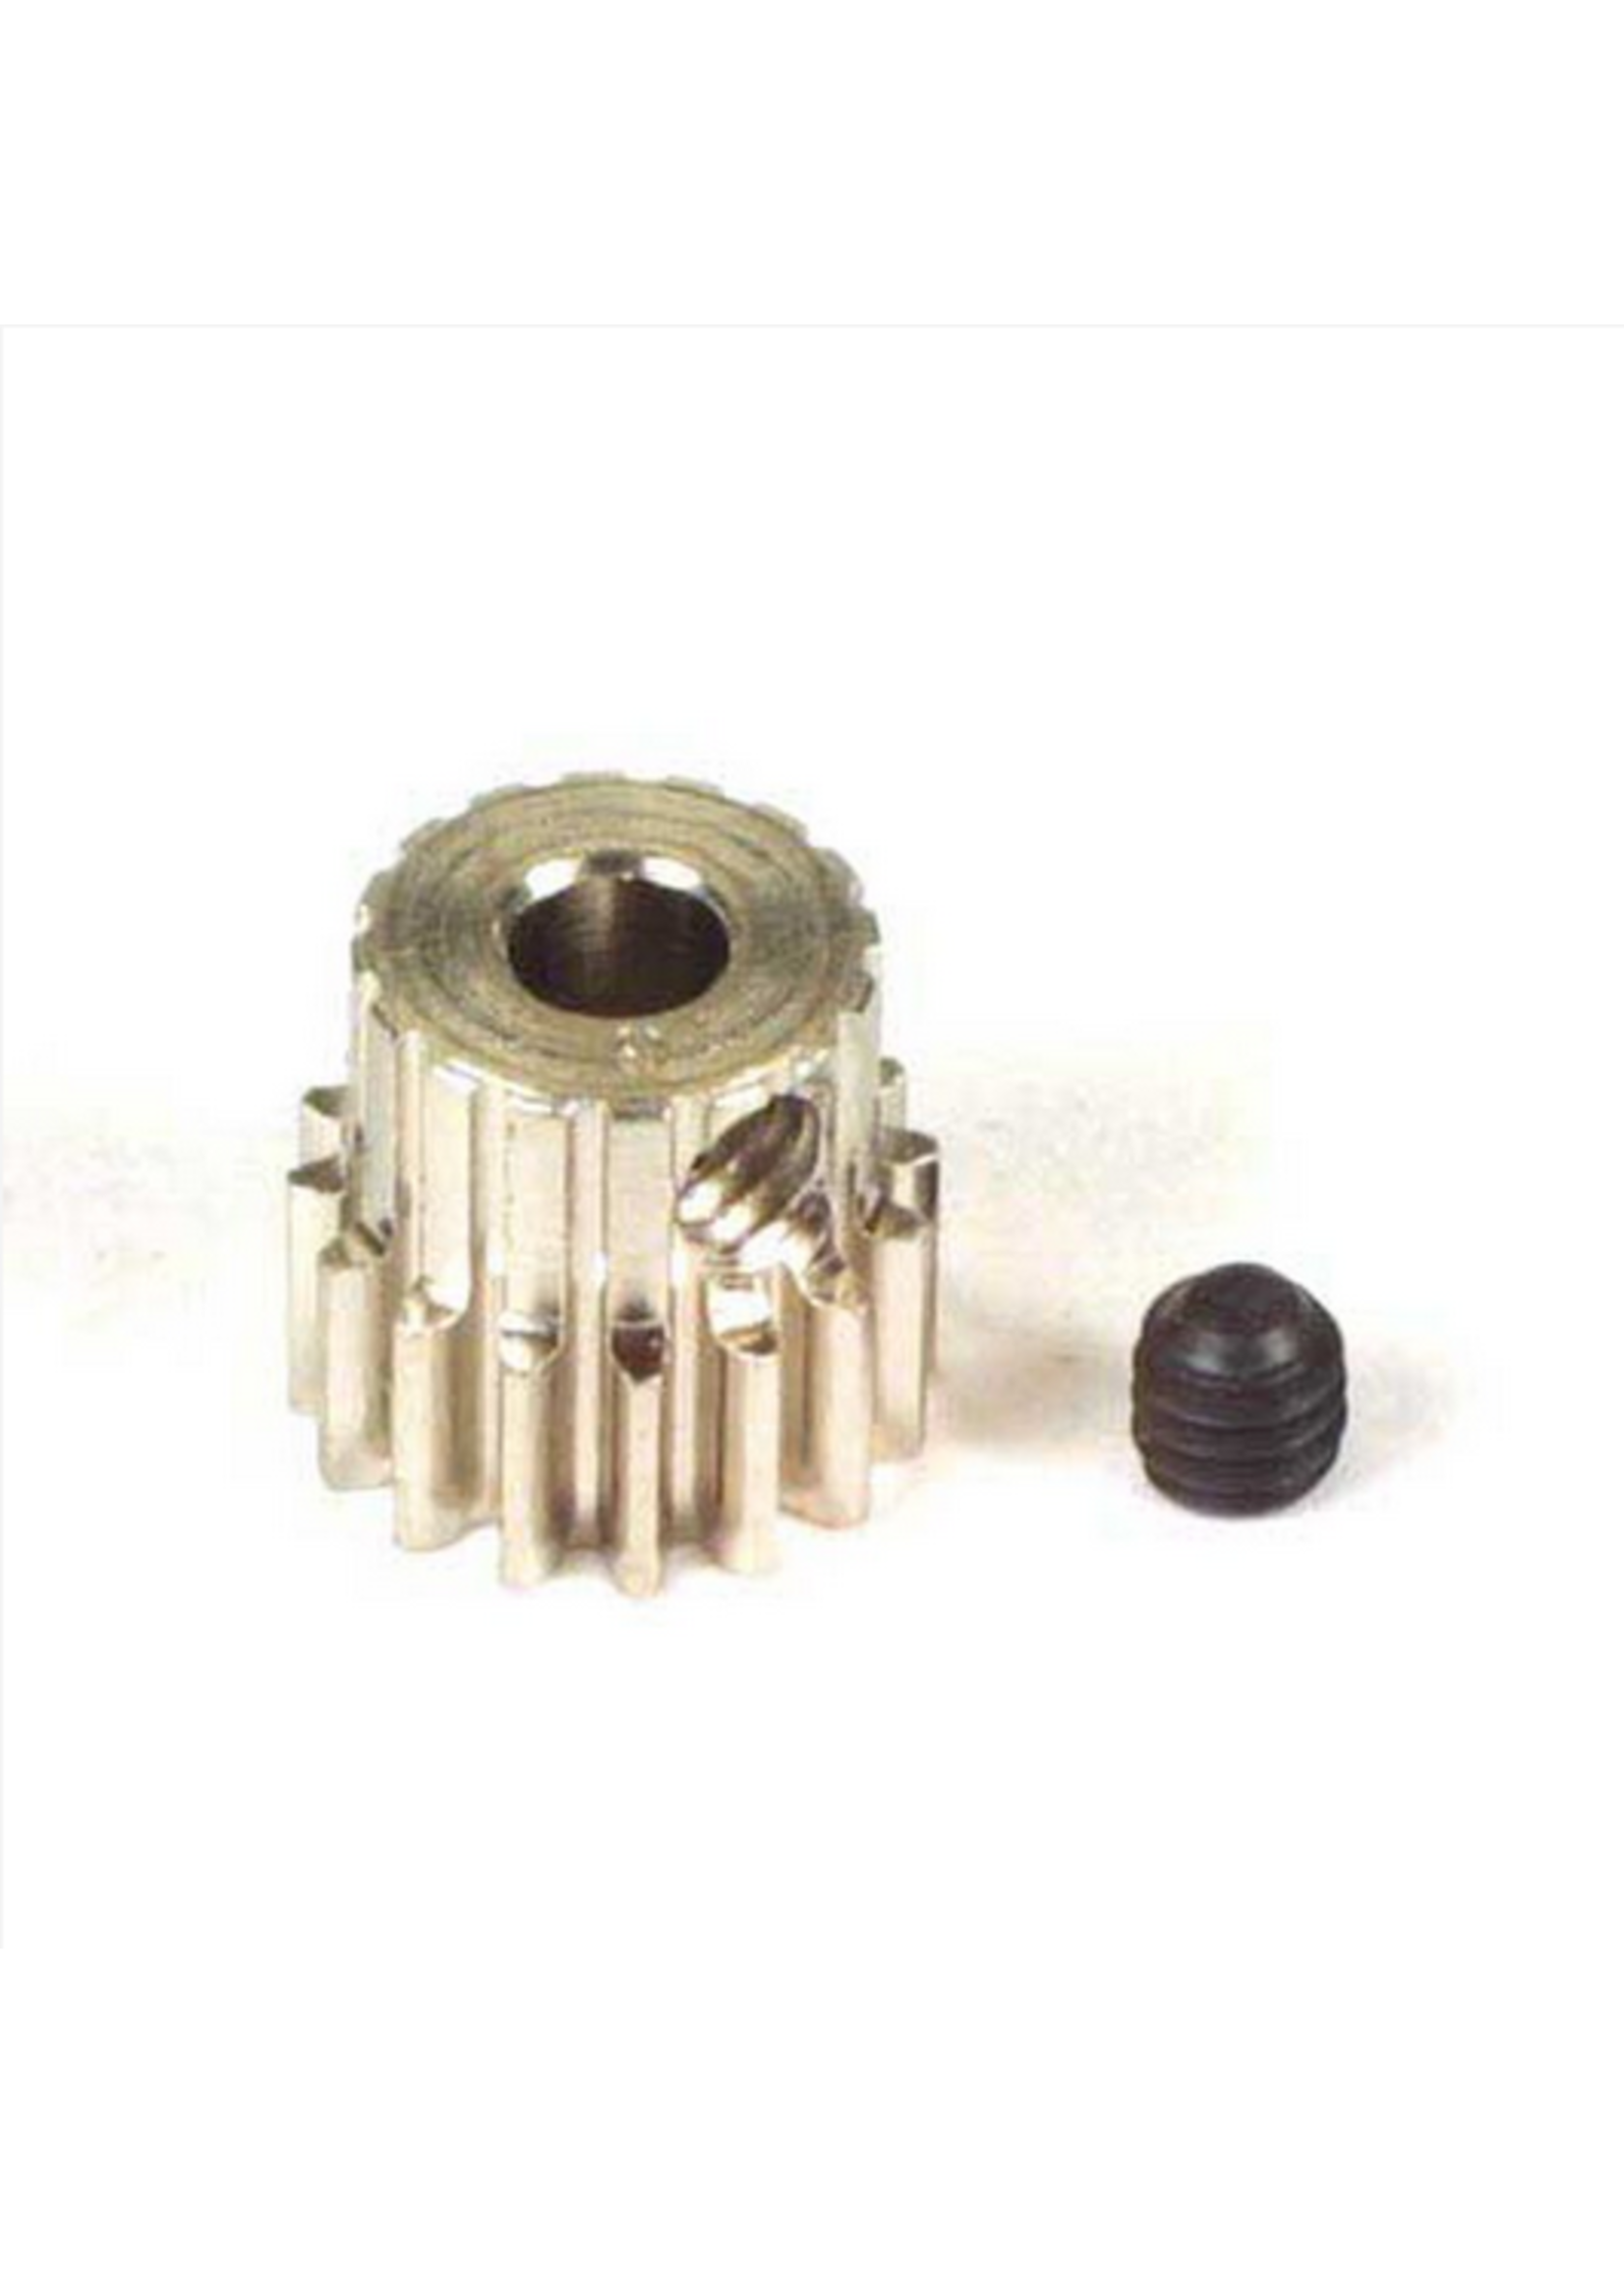 Robinson Racing Products RRP1014 Robinson Racing Products Steel 48P Pinion Gear (3.17mm Bore) (14T)